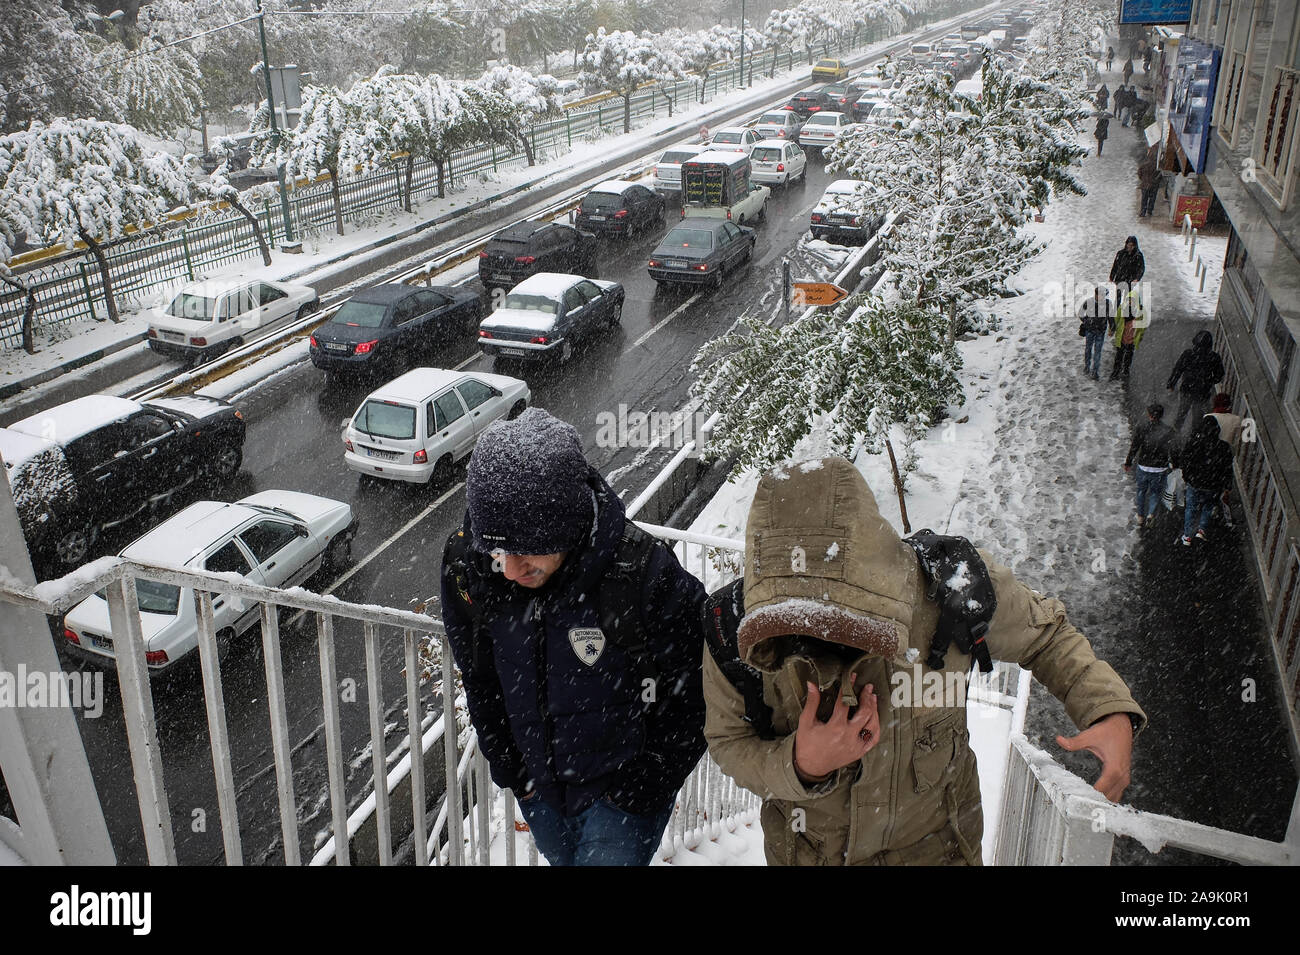 Tehran, IRAN. 16th Nov, 2019. Iranians walk amid the snow in the capital Tehran. Heavy snowfall blanketed the streets of north Tehran on Saturday, causing traffic chaos and forcing the closure of schools, authorities in the Iranian capital said. Credit: Rouzbeh Fouladi/ZUMA Wire/Alamy Live News Credit: ZUMA Press, Inc./Alamy Live News Stock Photo